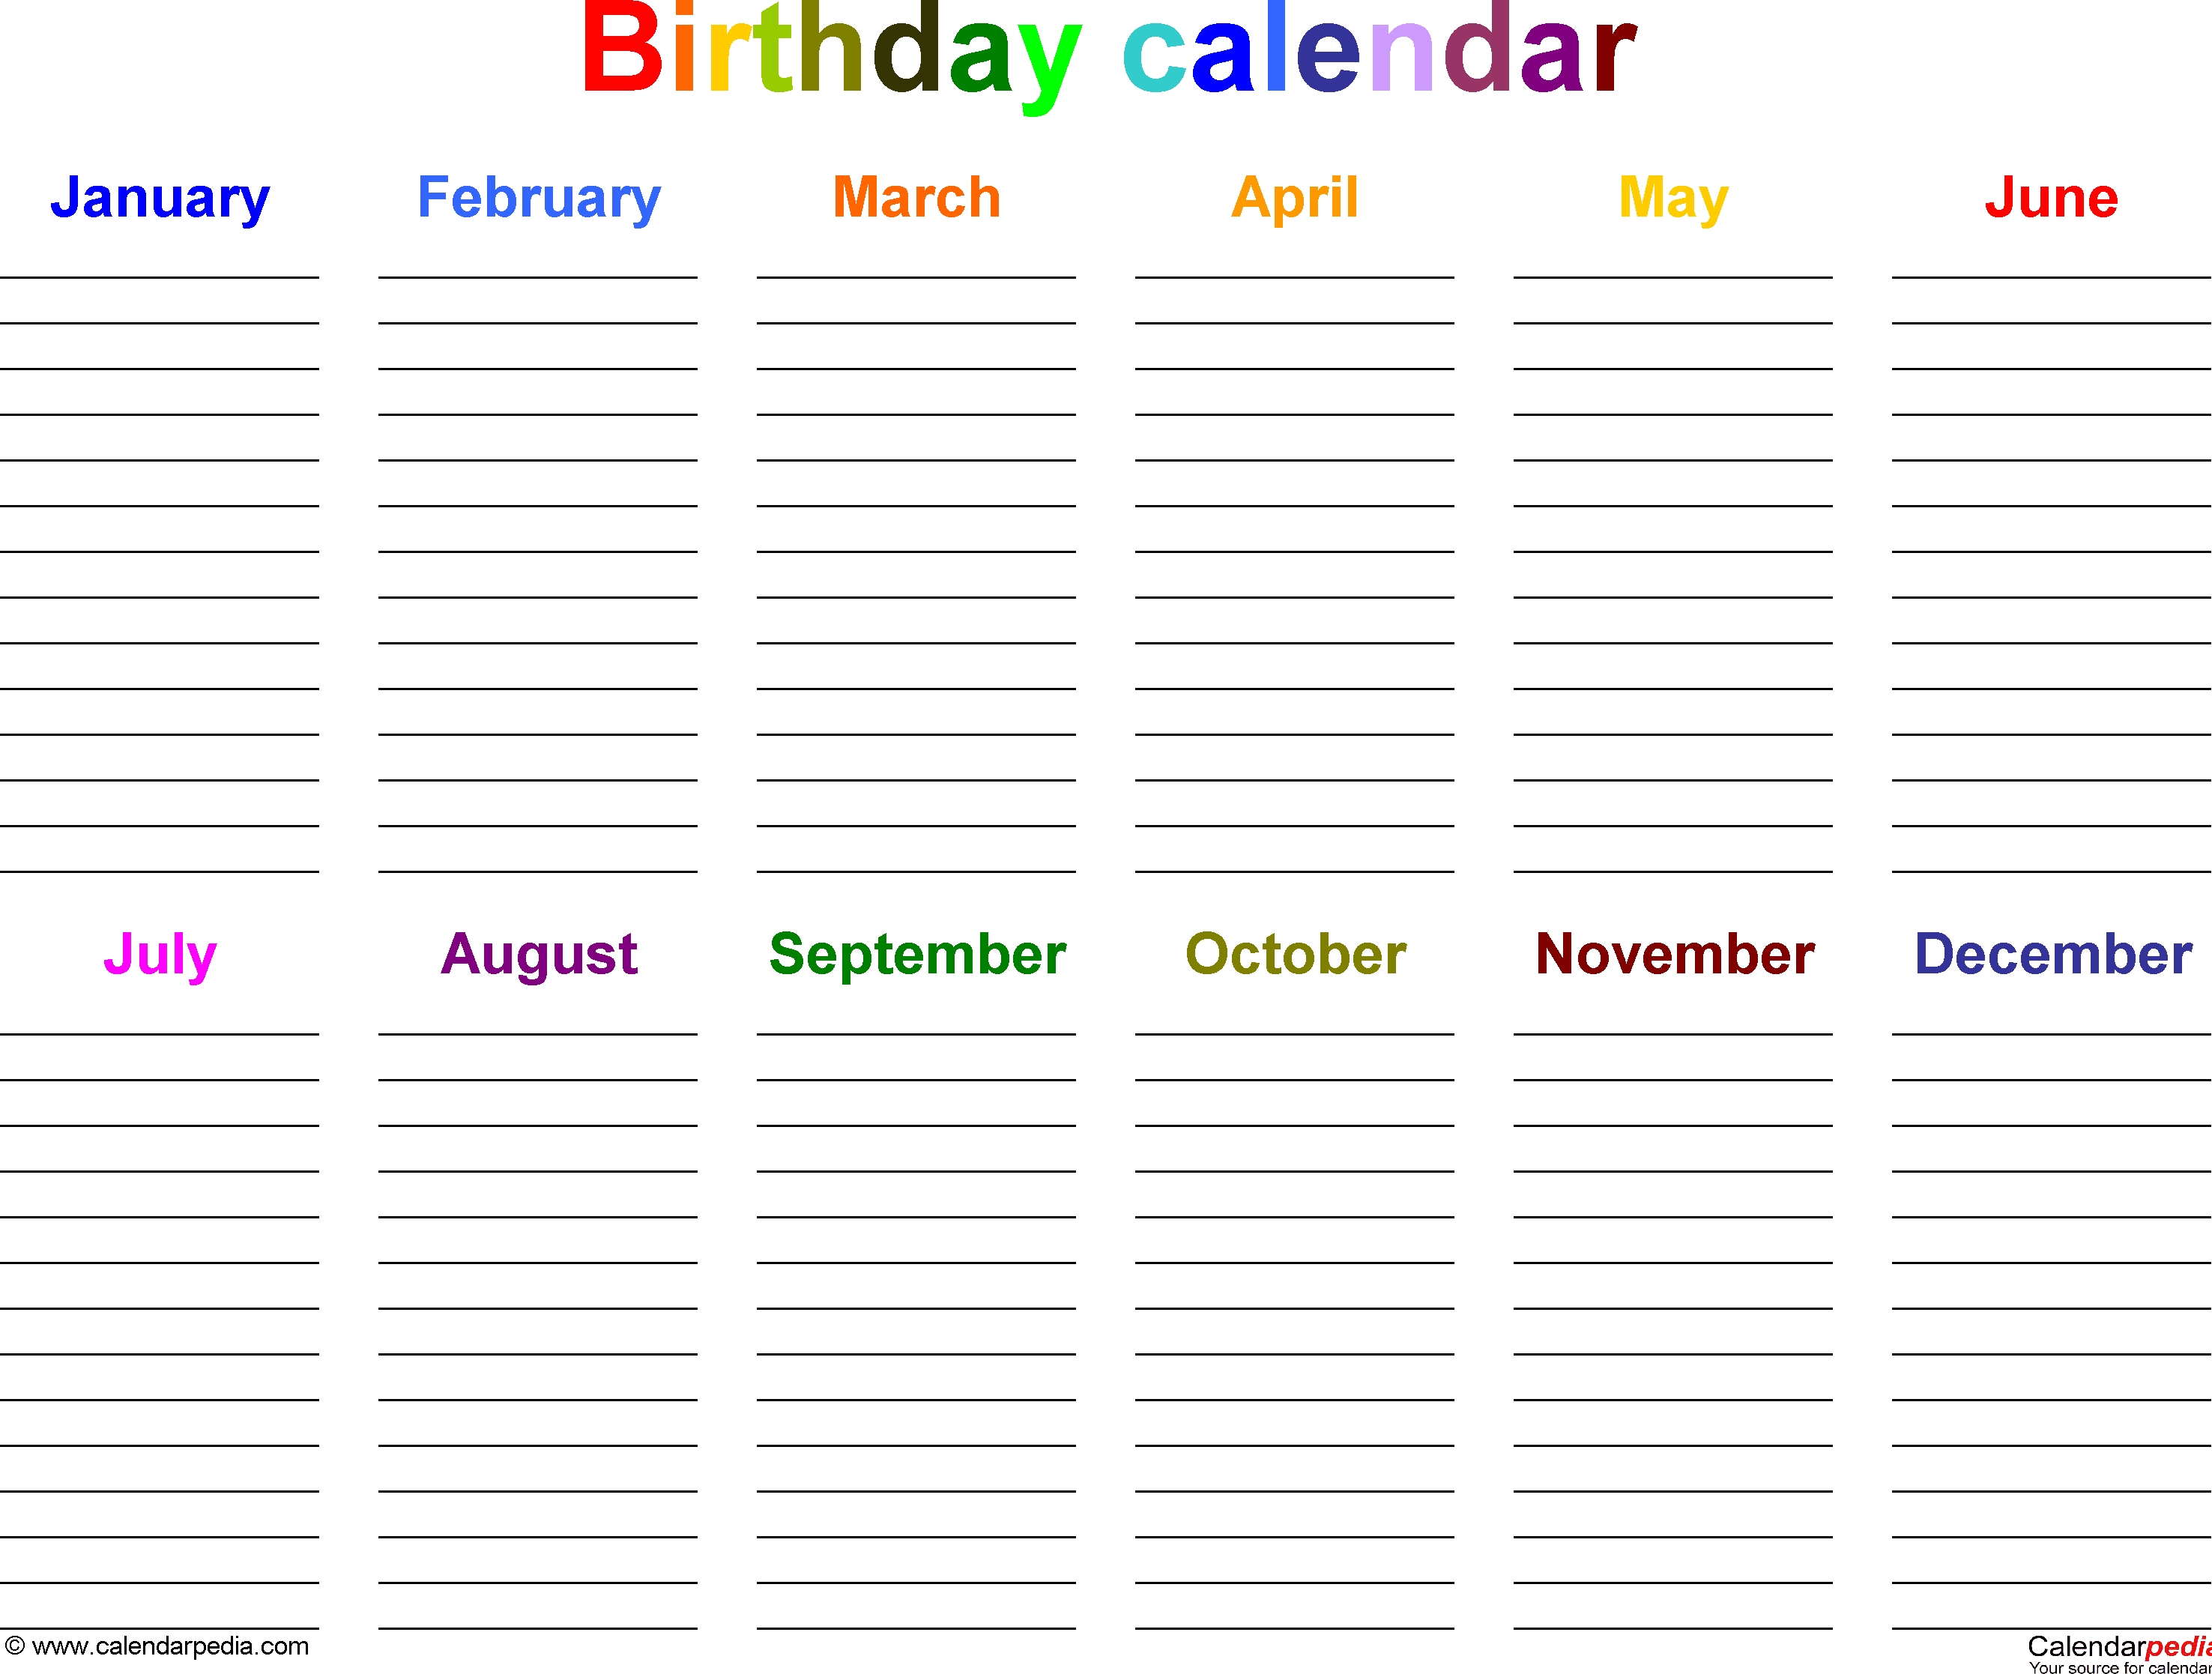 Excel Template For Birthday Calendar In Color (Landscape Orientation intended for Format For A Birthday/ Anniversary Calendar